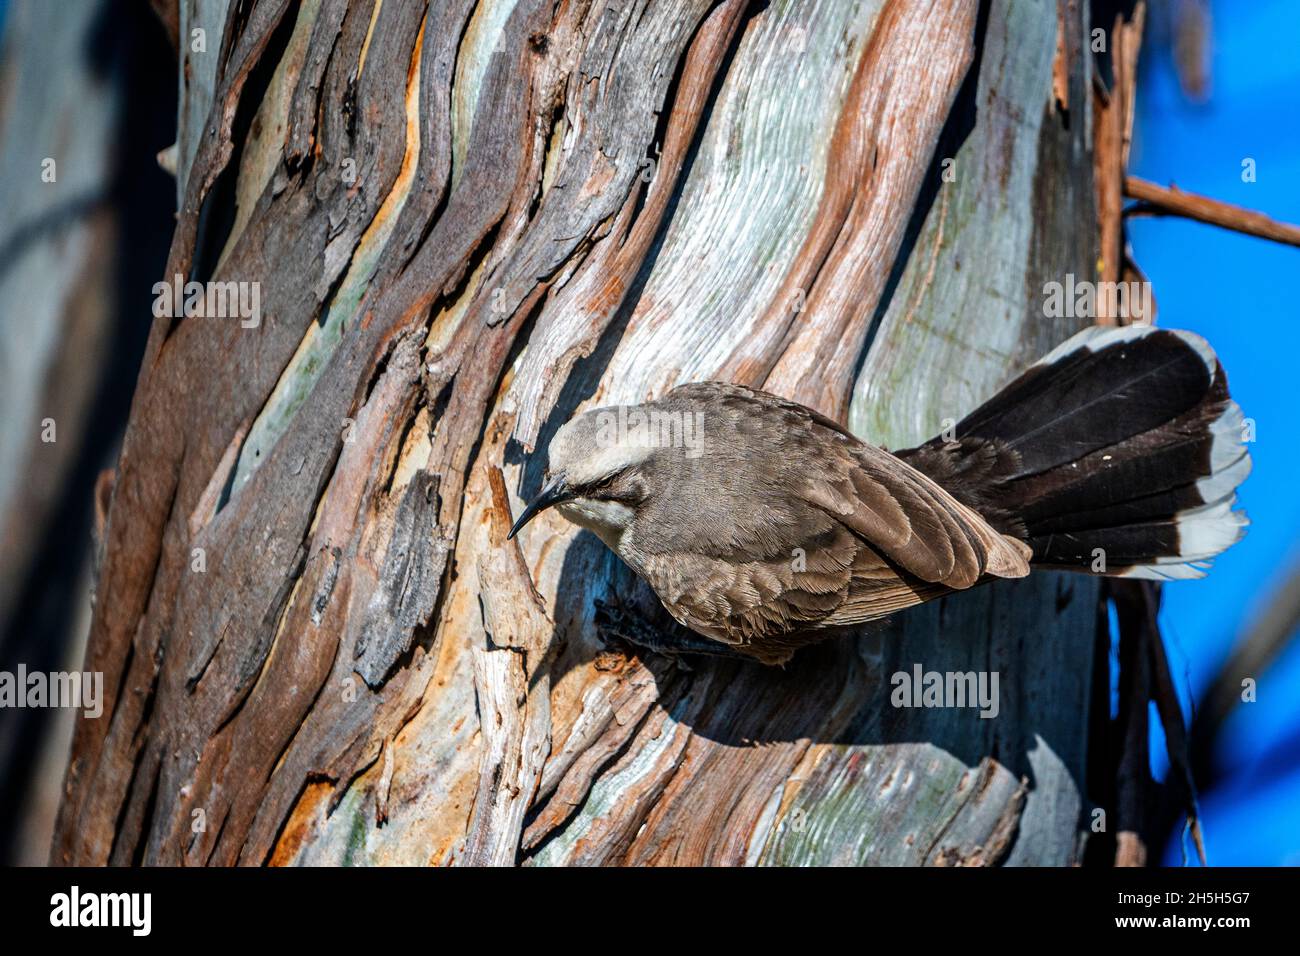 White-browed babbler (Pomatostomus superciliosus) searching for insects under tree bark on tree truck. Darling Downs Queensland, Australia Stock Photo